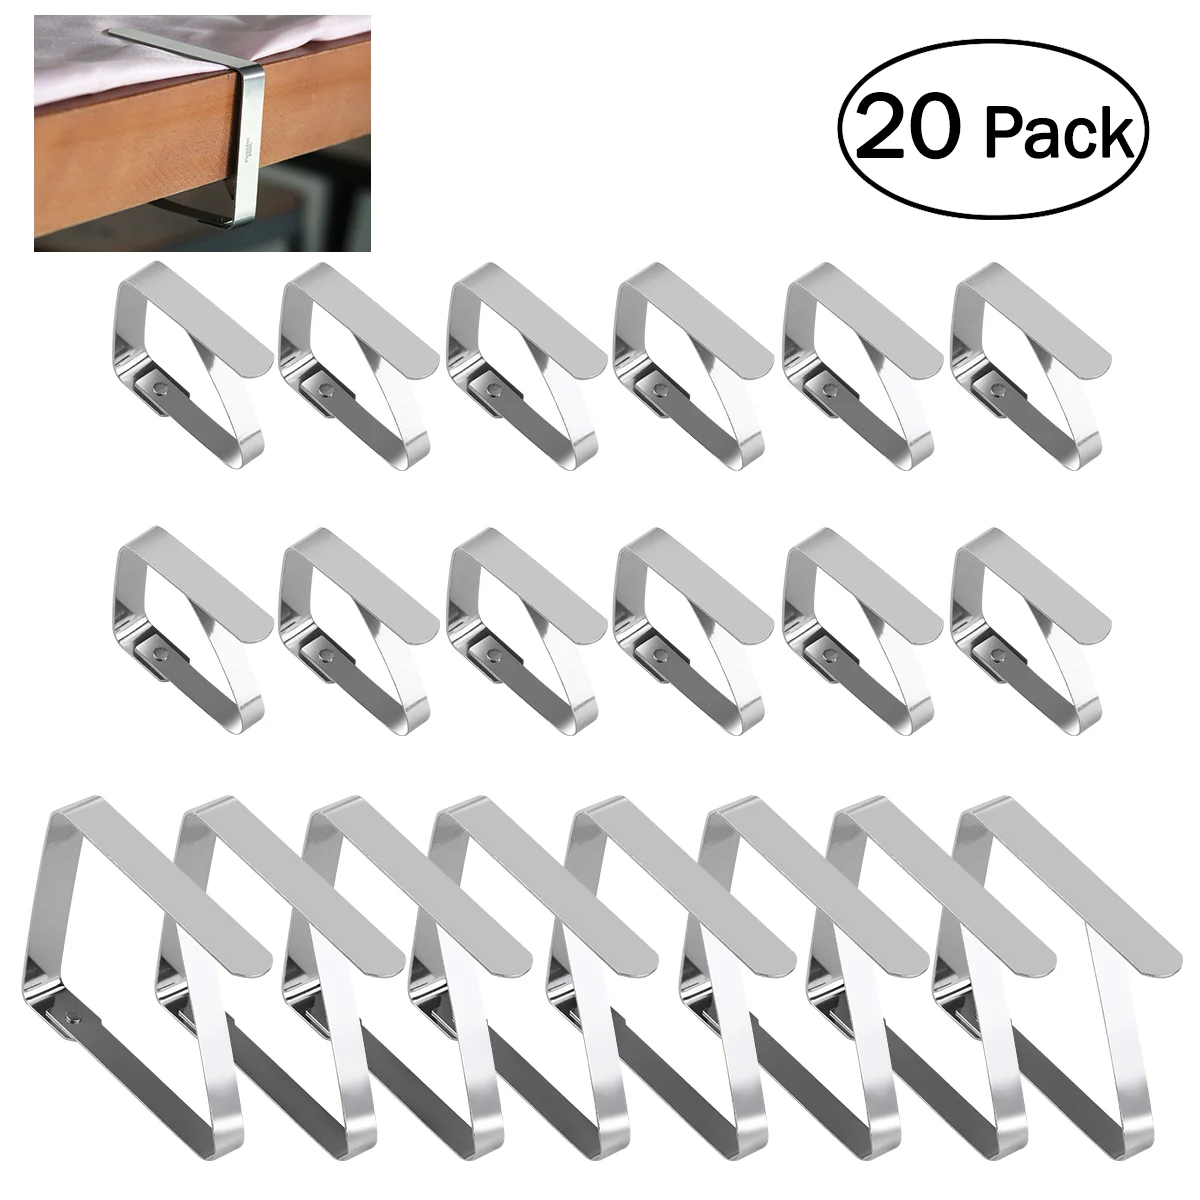 

OUNONA 20pcs Tablecloth Clips Silver Table Cloth Clamps Table Cover Holder Securing Clips for Kitchen Restaurant